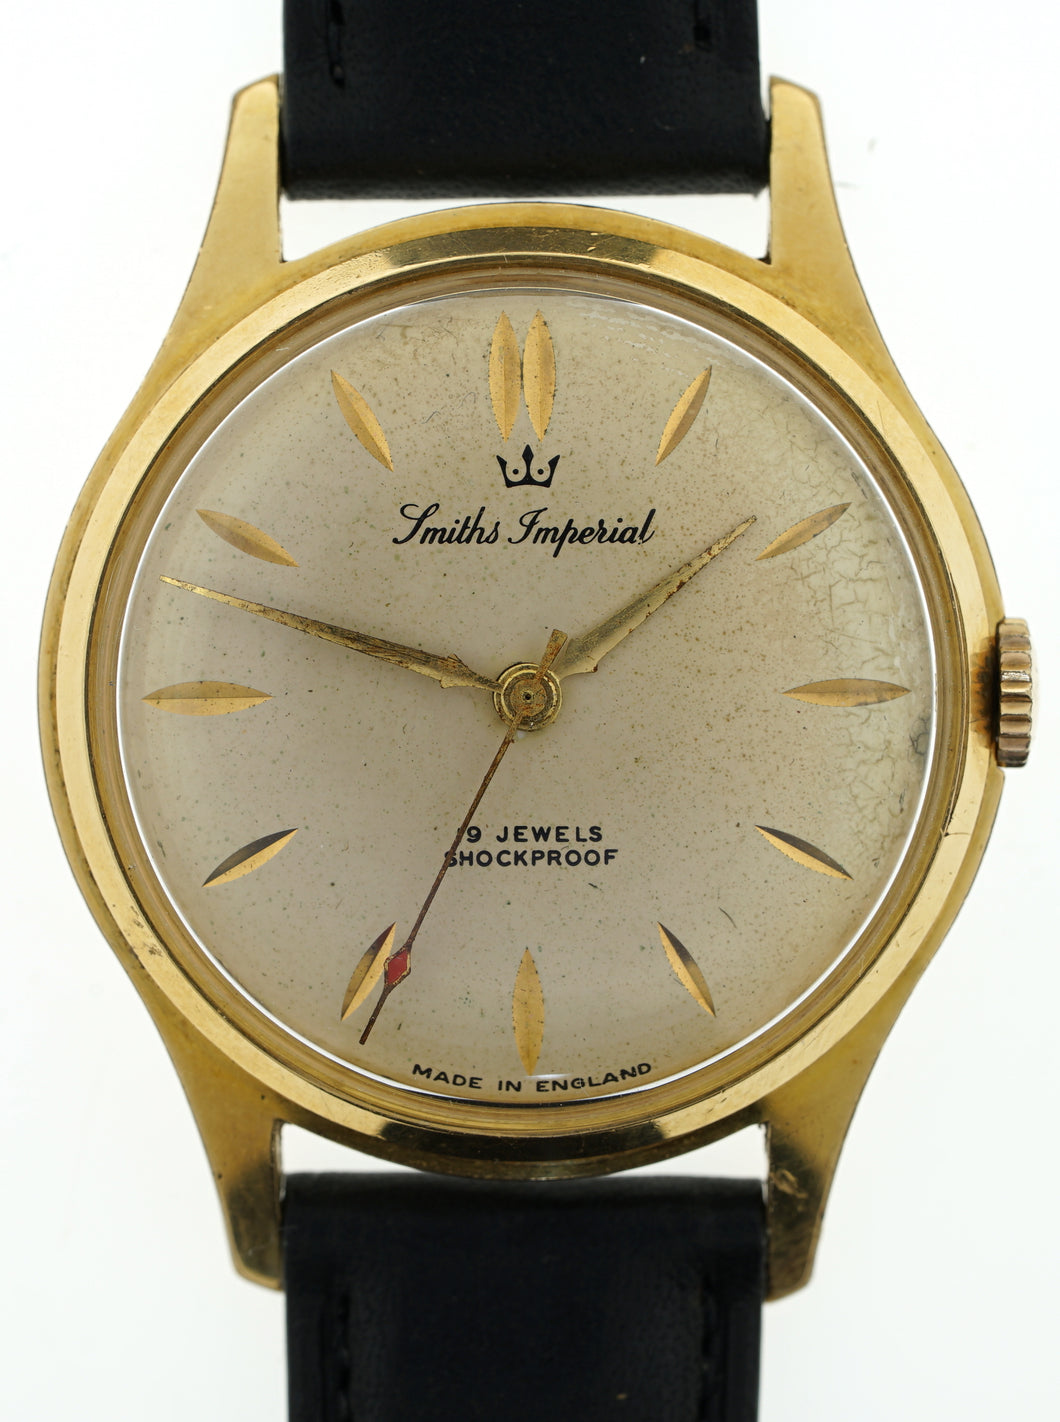 IMPERIAL SMITHS GOLD PLATED 19J ENGLISH WRISTWATCH IN GOOD WORKING ORDER